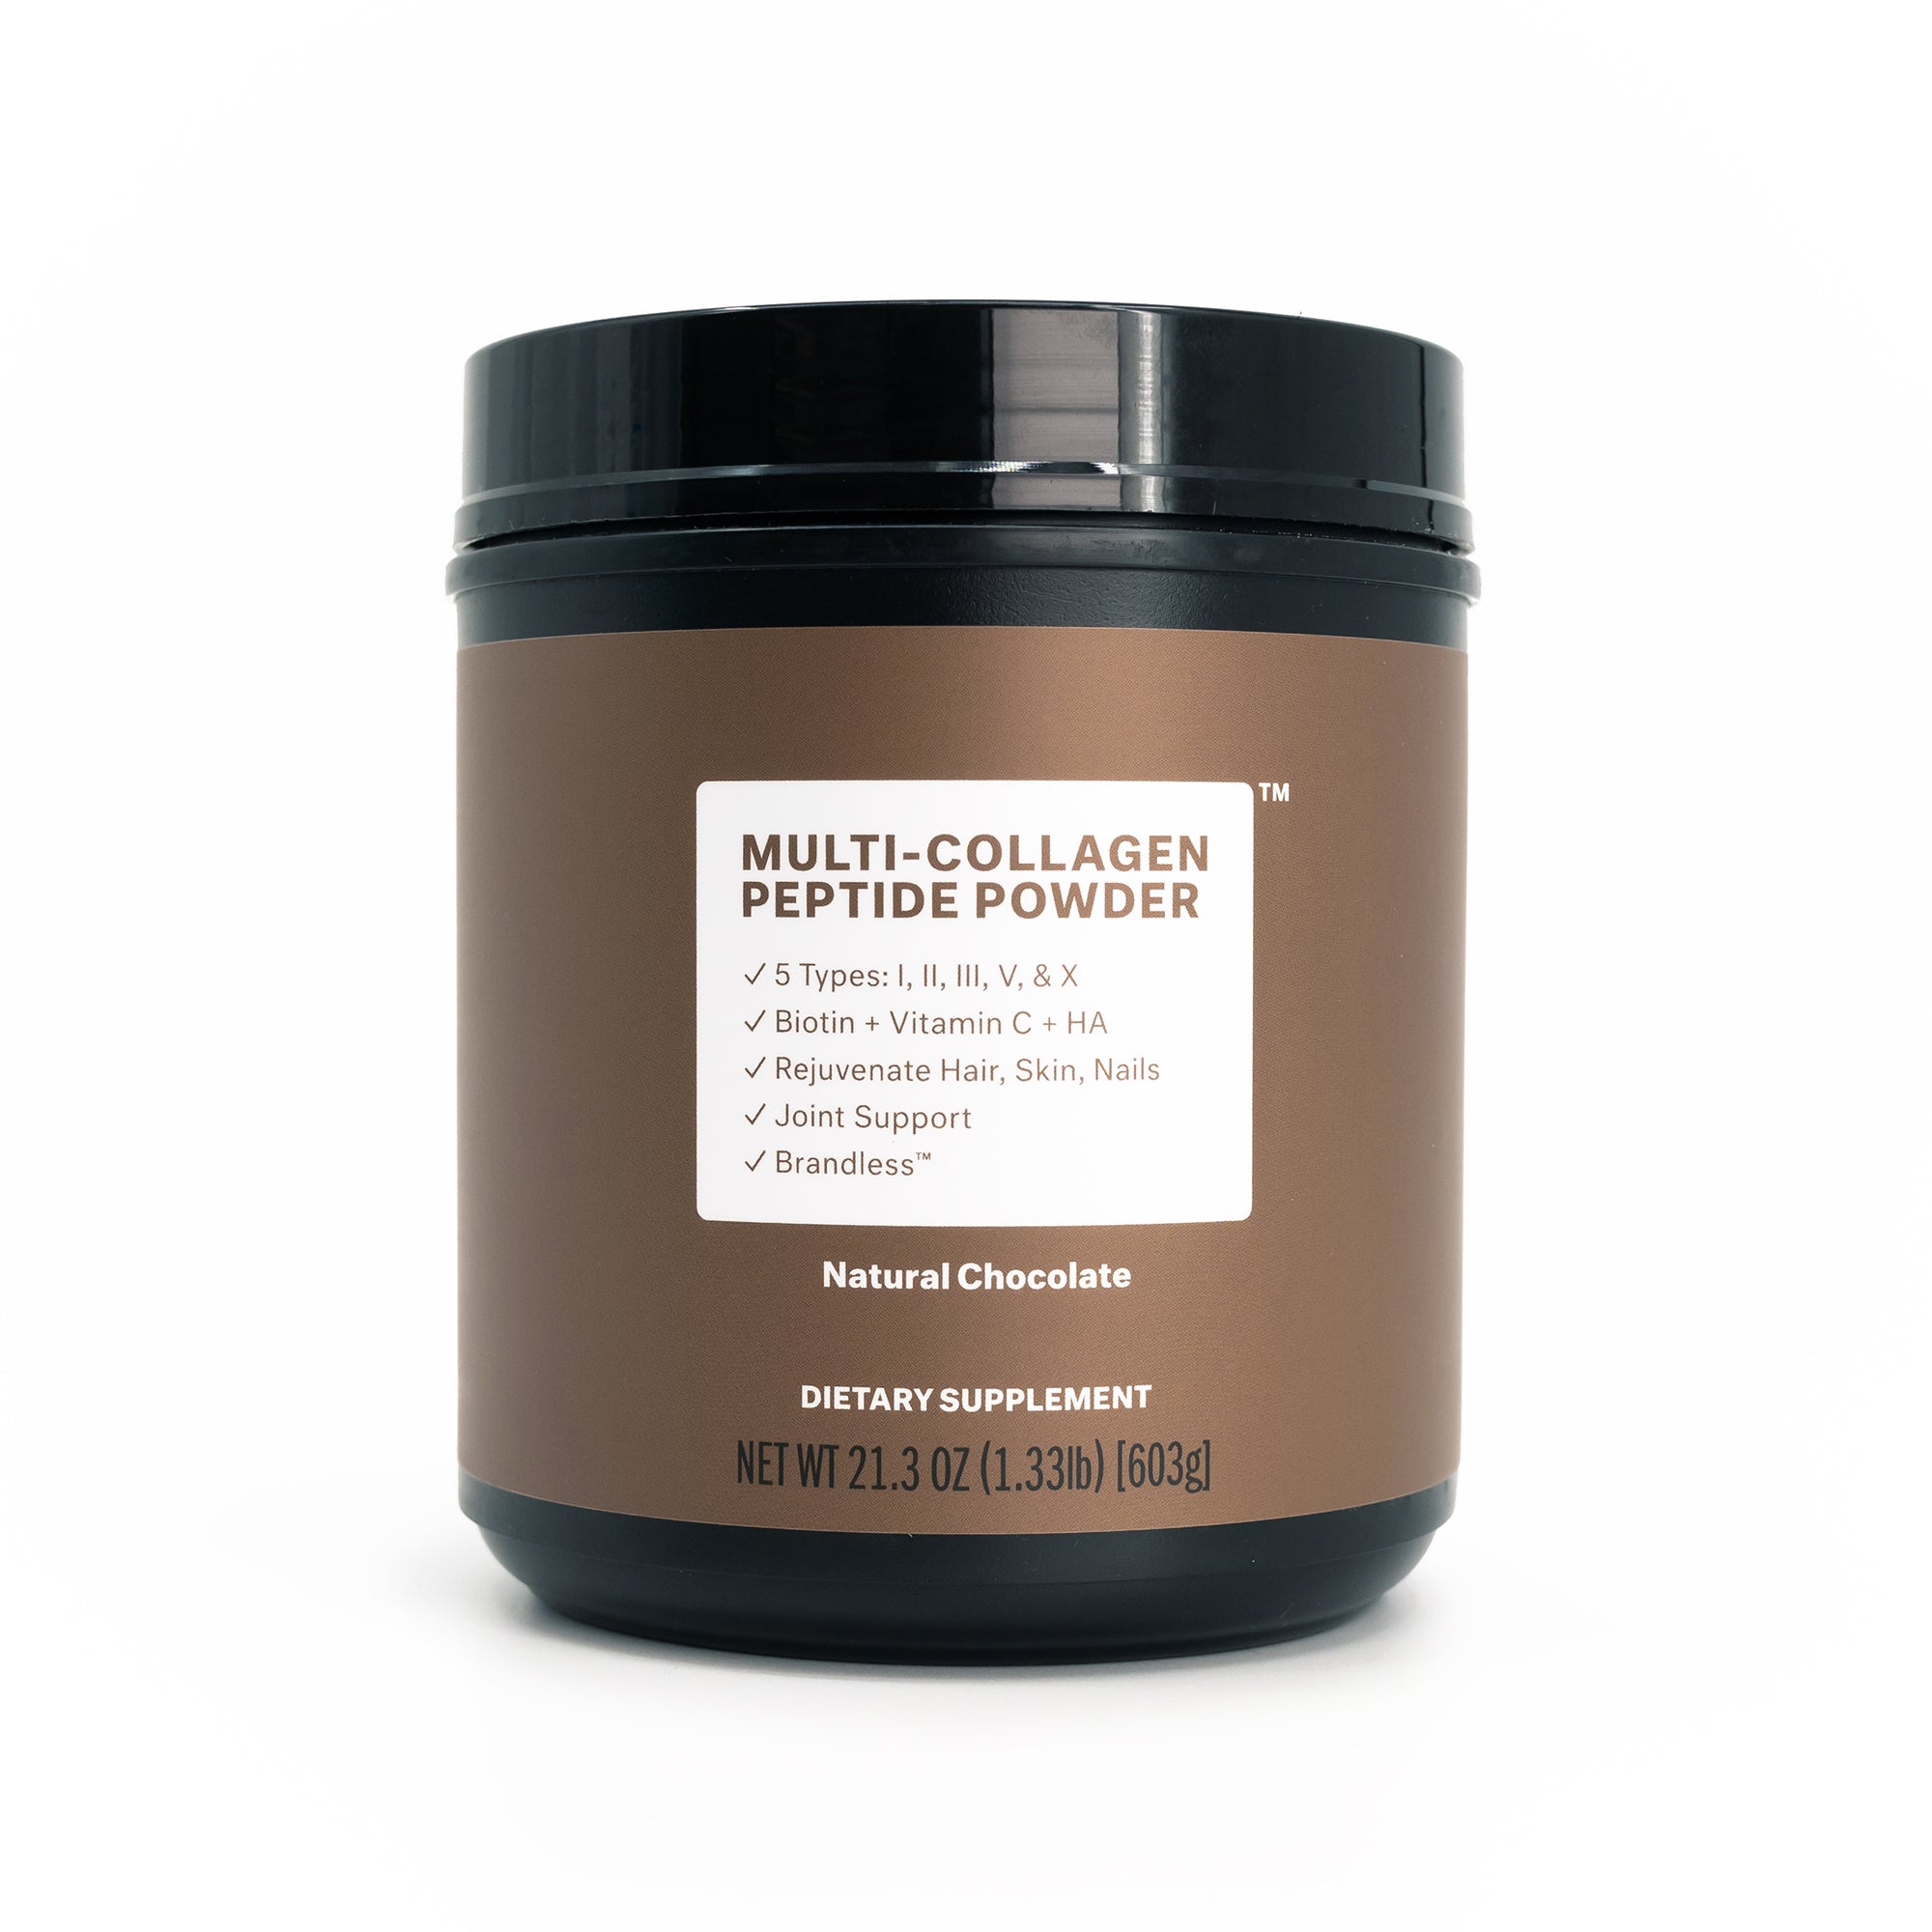 Product photo, multi-collagen peptide powder, natural chocolate, front of tub.  5 types of collagen peptides: I, II, III, V, and X.  Biotin + Vitamin C + HA.  Rejuvinate Hair, Skin, and Nails.  Joint Support.  brandless.  Natural chocolate.  Dietary supplement. Net weight 21.3 oz. (1.33lb) [603g]